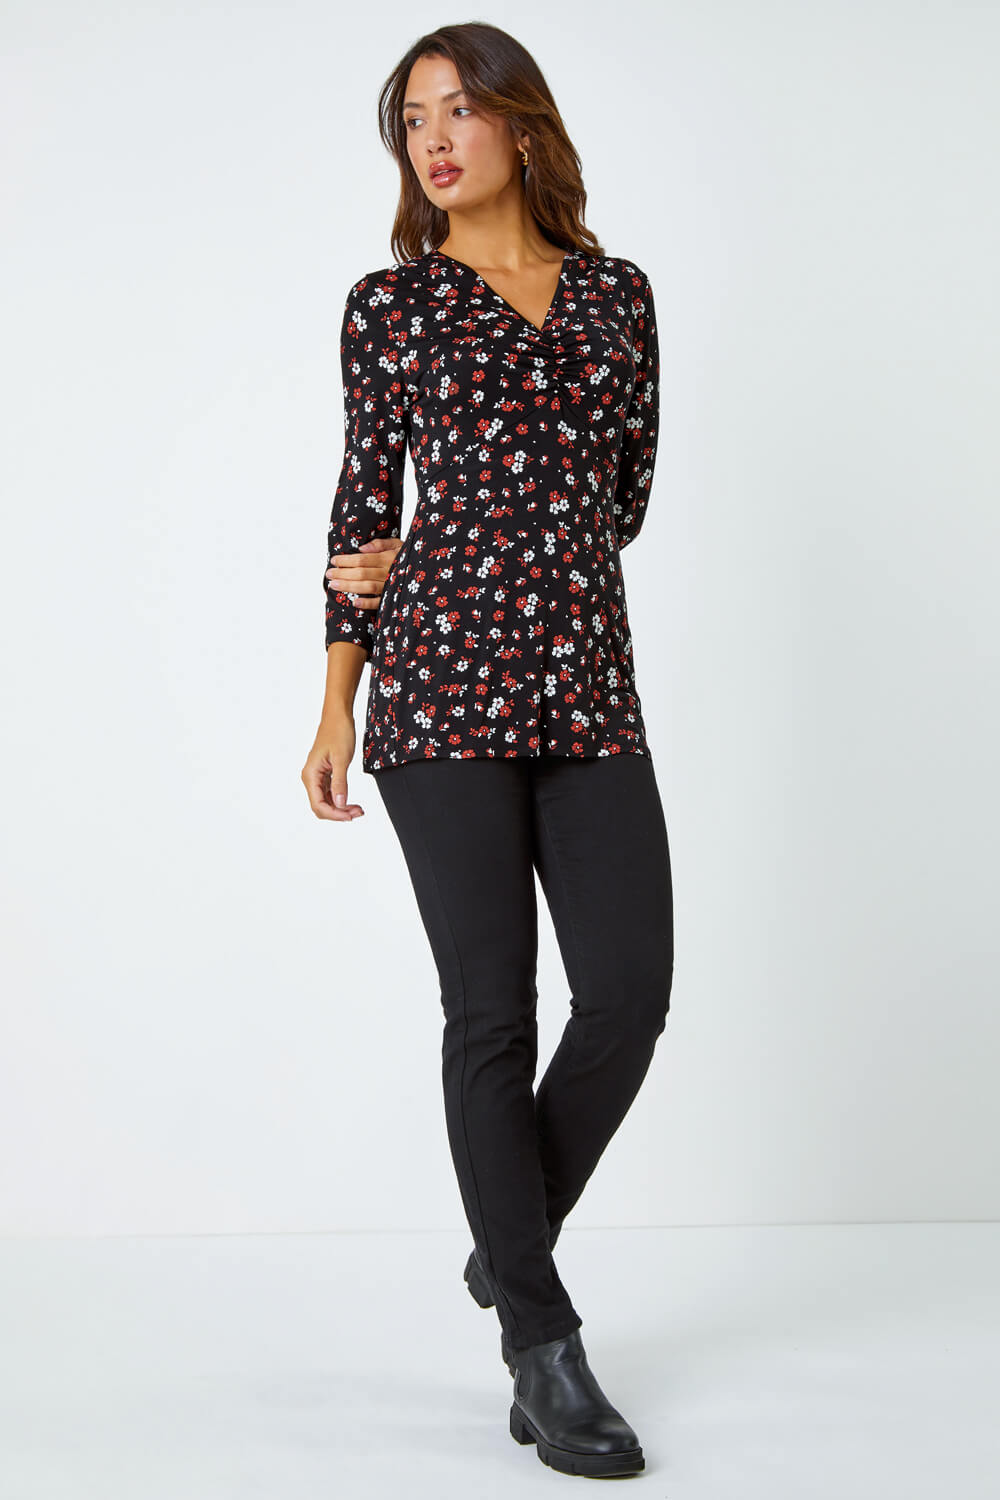 Rust Floral Print Ruched Stretch Top, Image 2 of 5